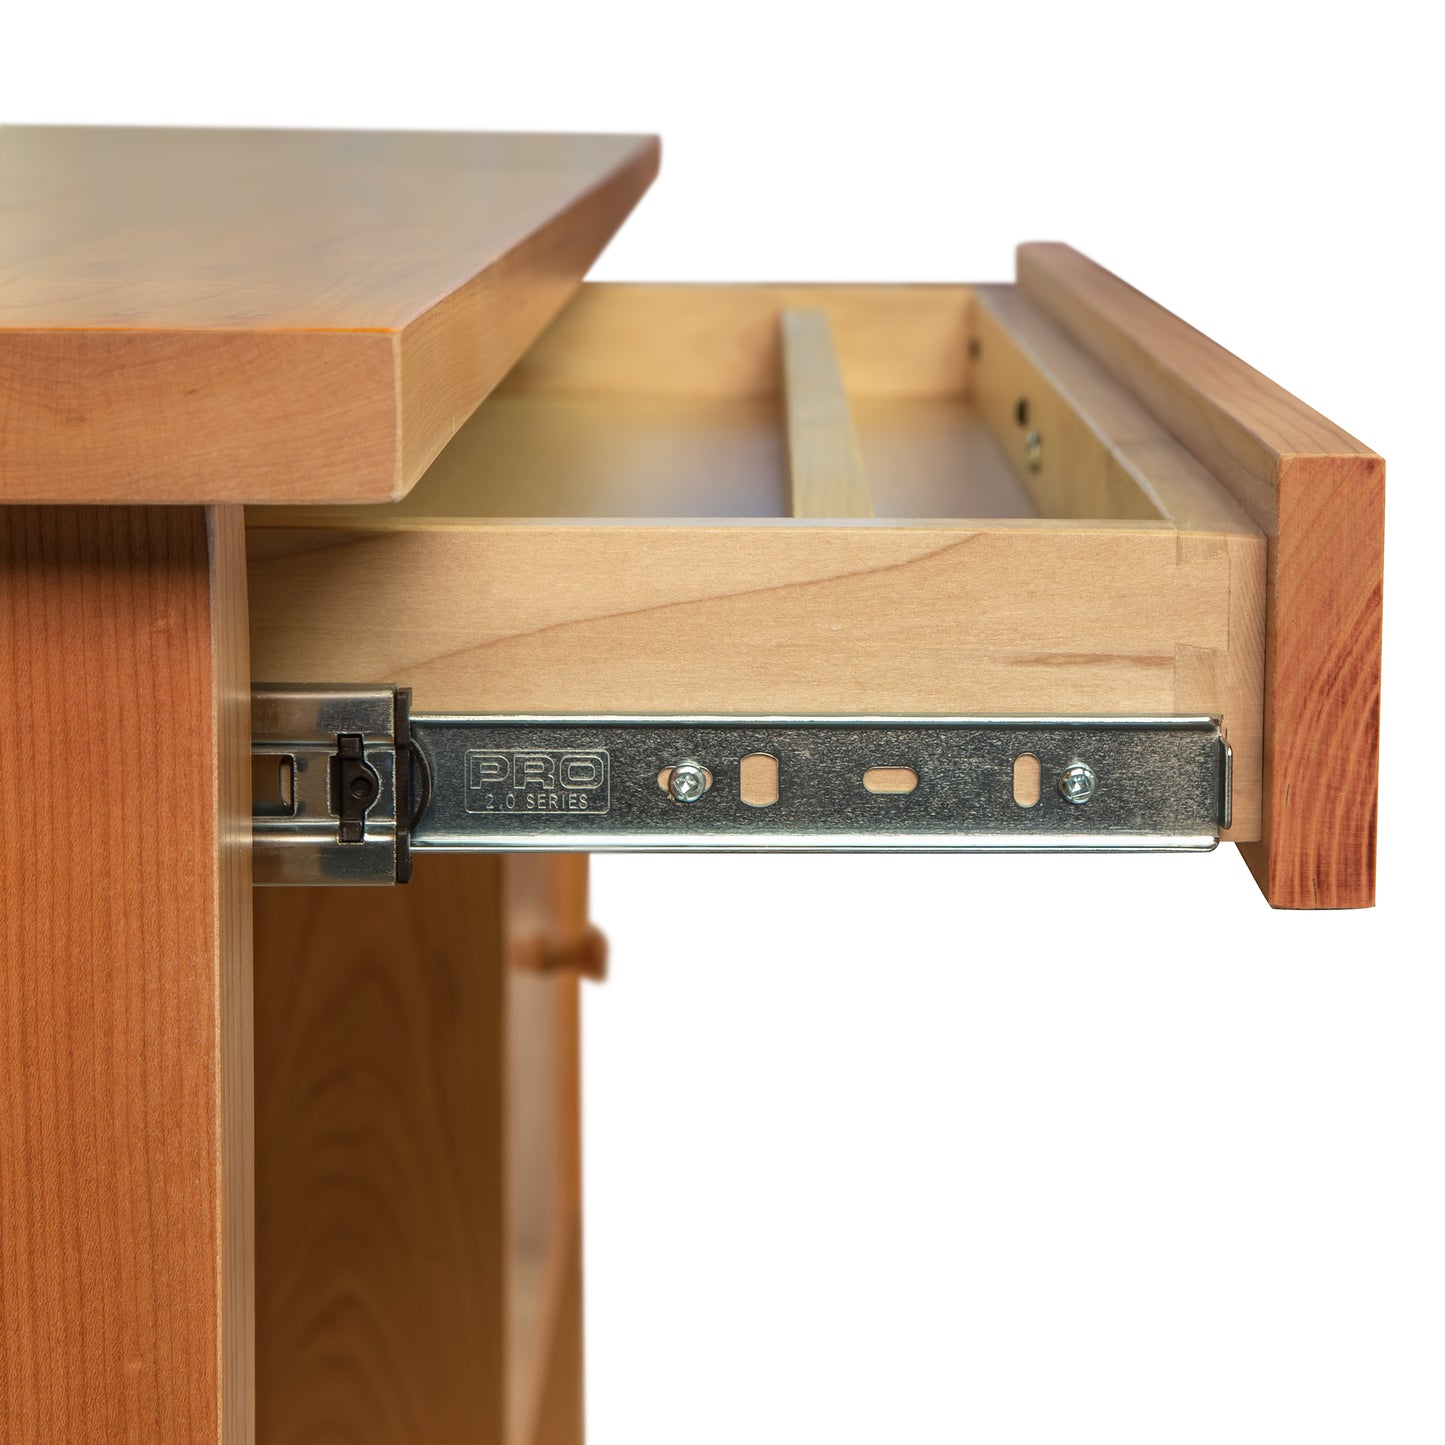 A drawer is open on a wooden desk.